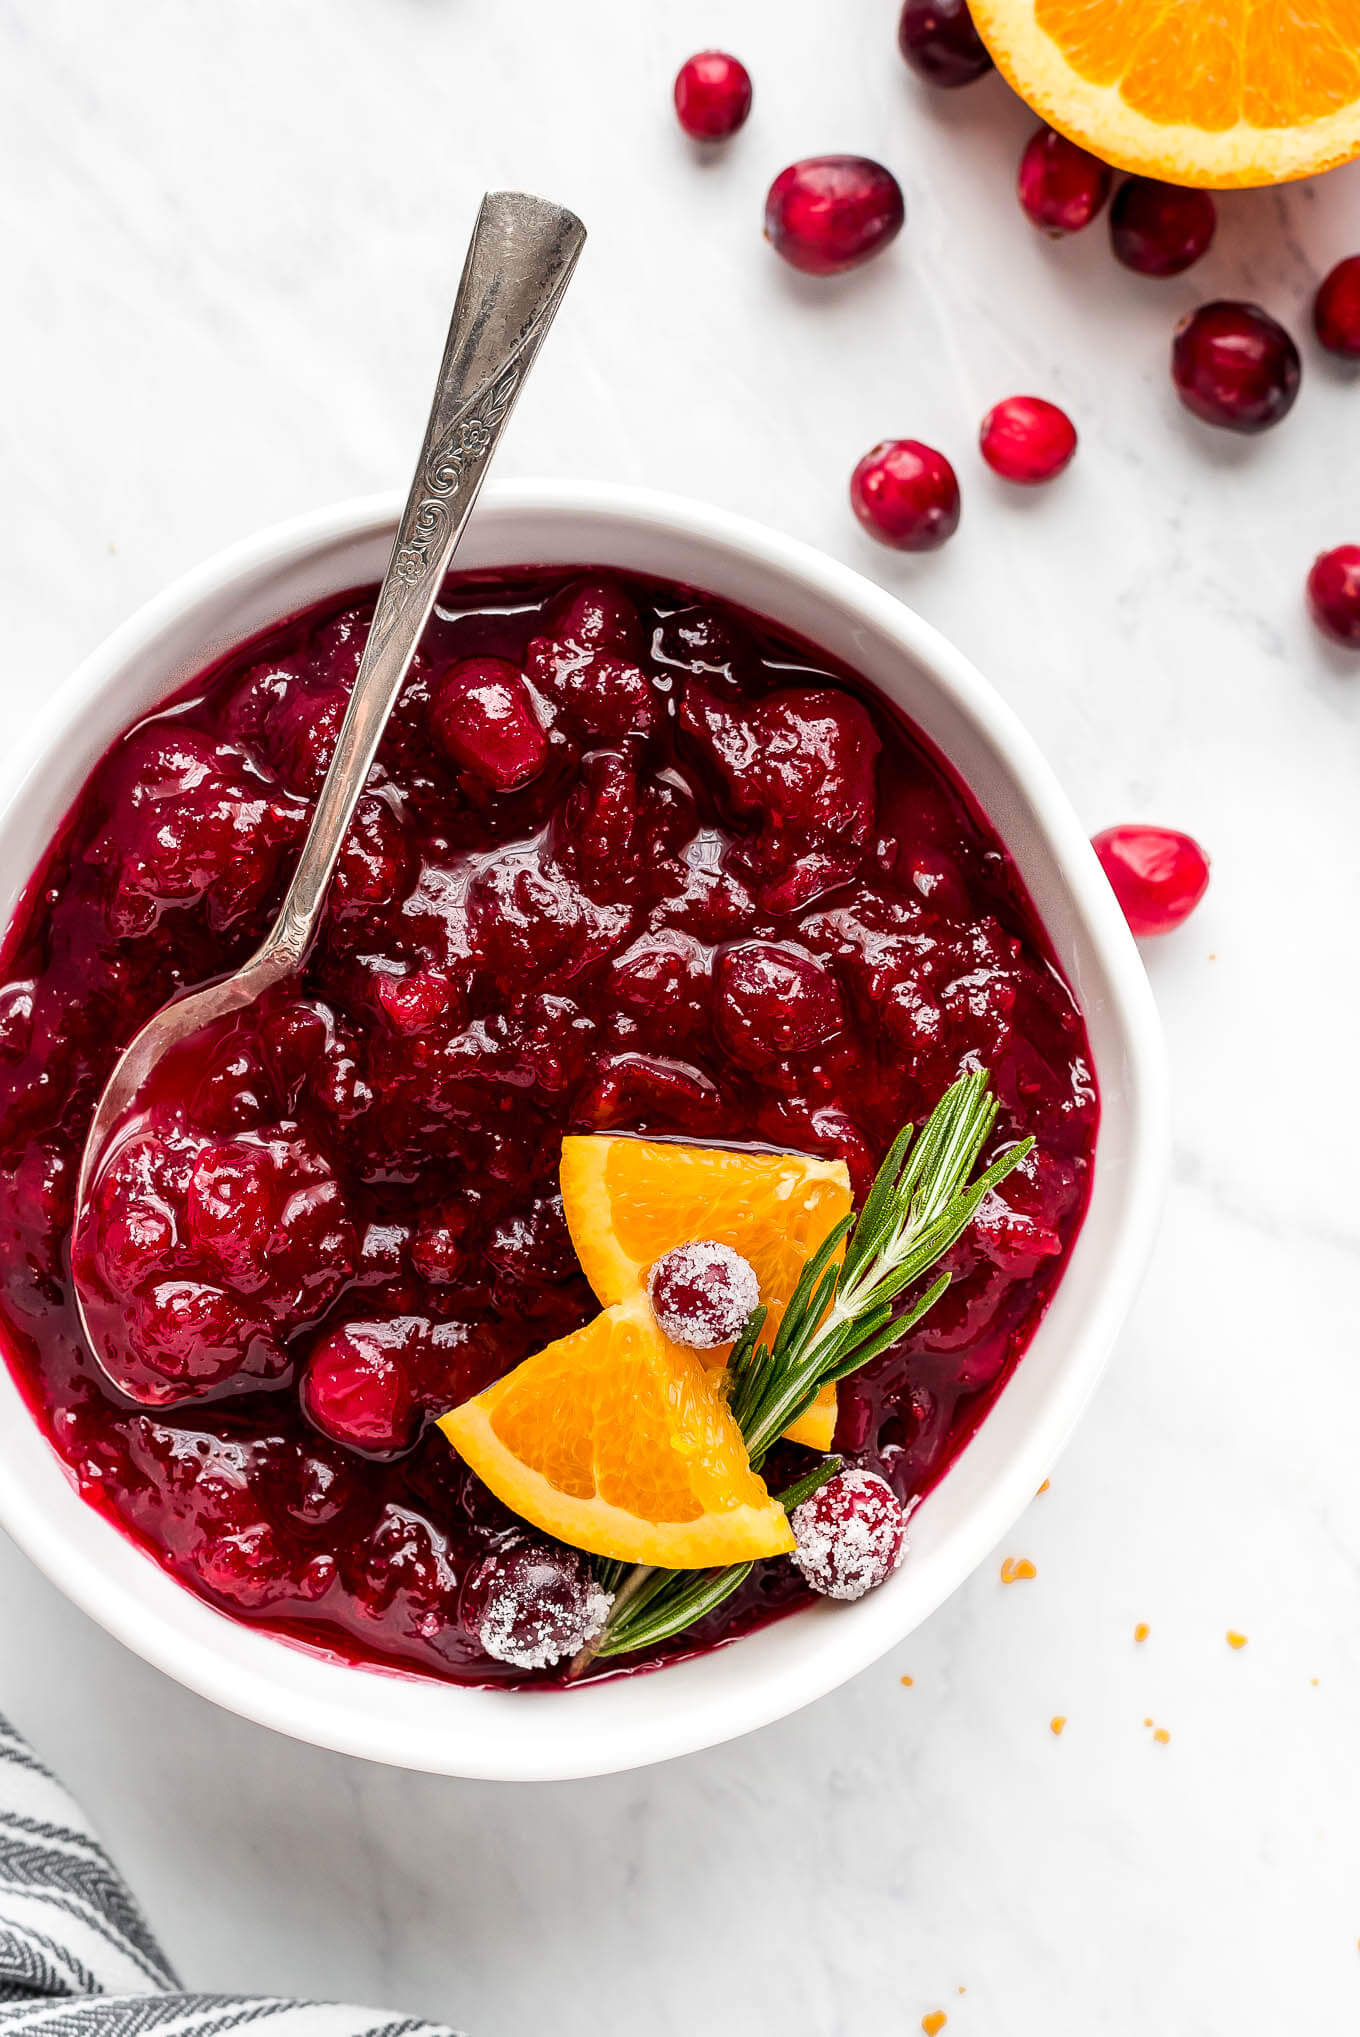 A bowl of Cranberry Sauce garnished with orange slices, rosemary, and sugared cranberries.